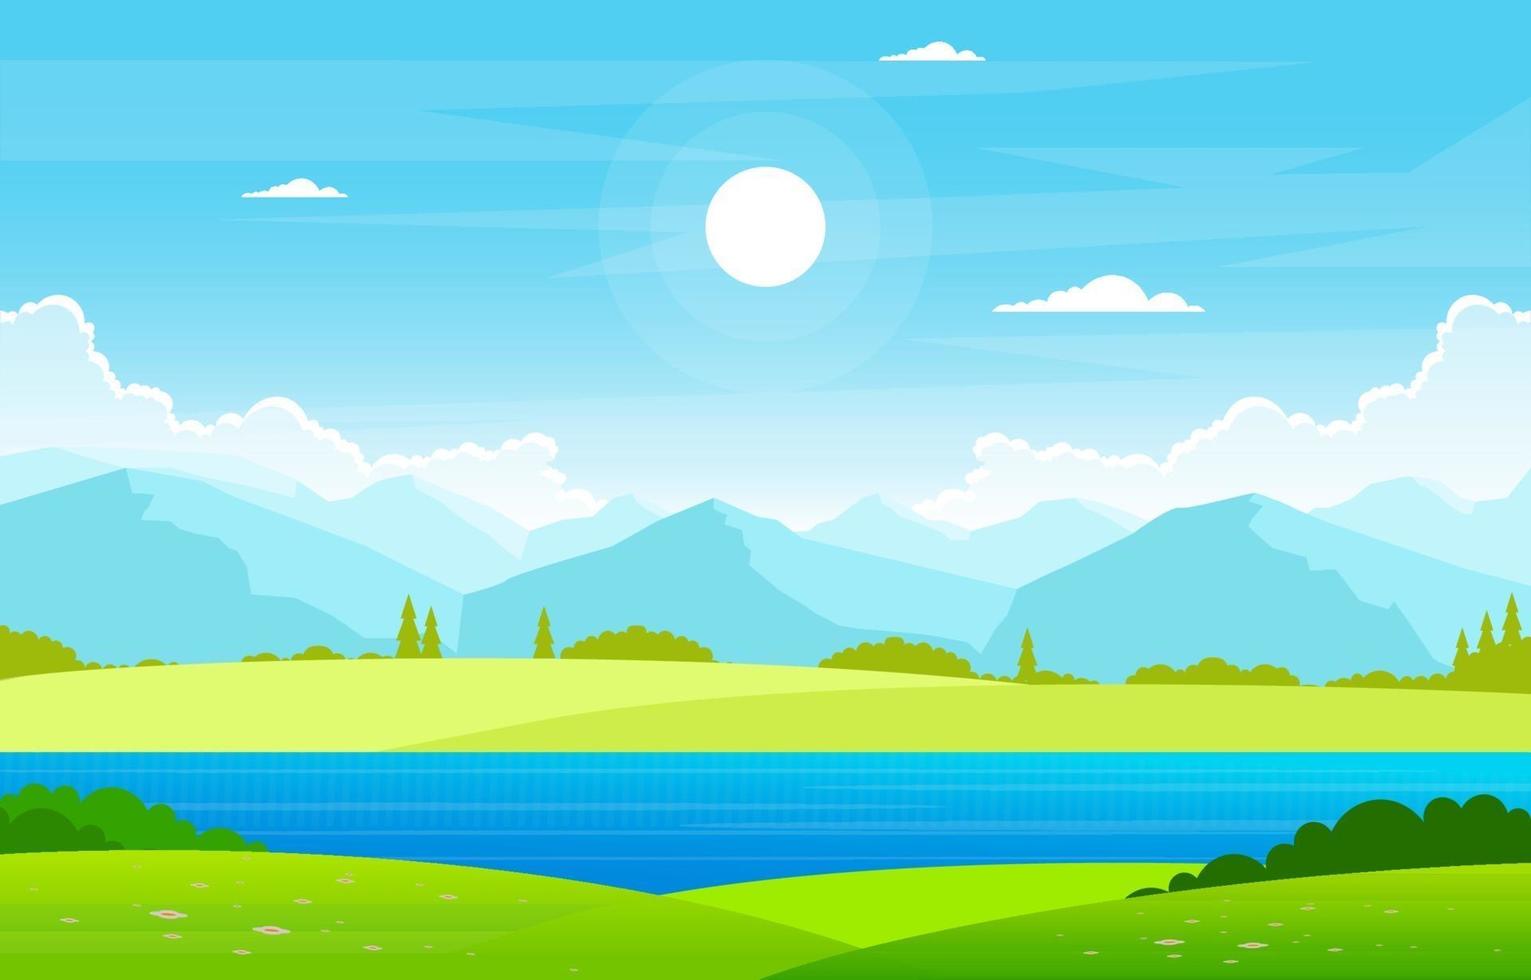 Summer Lake with Green Field Landscape Illustration vector